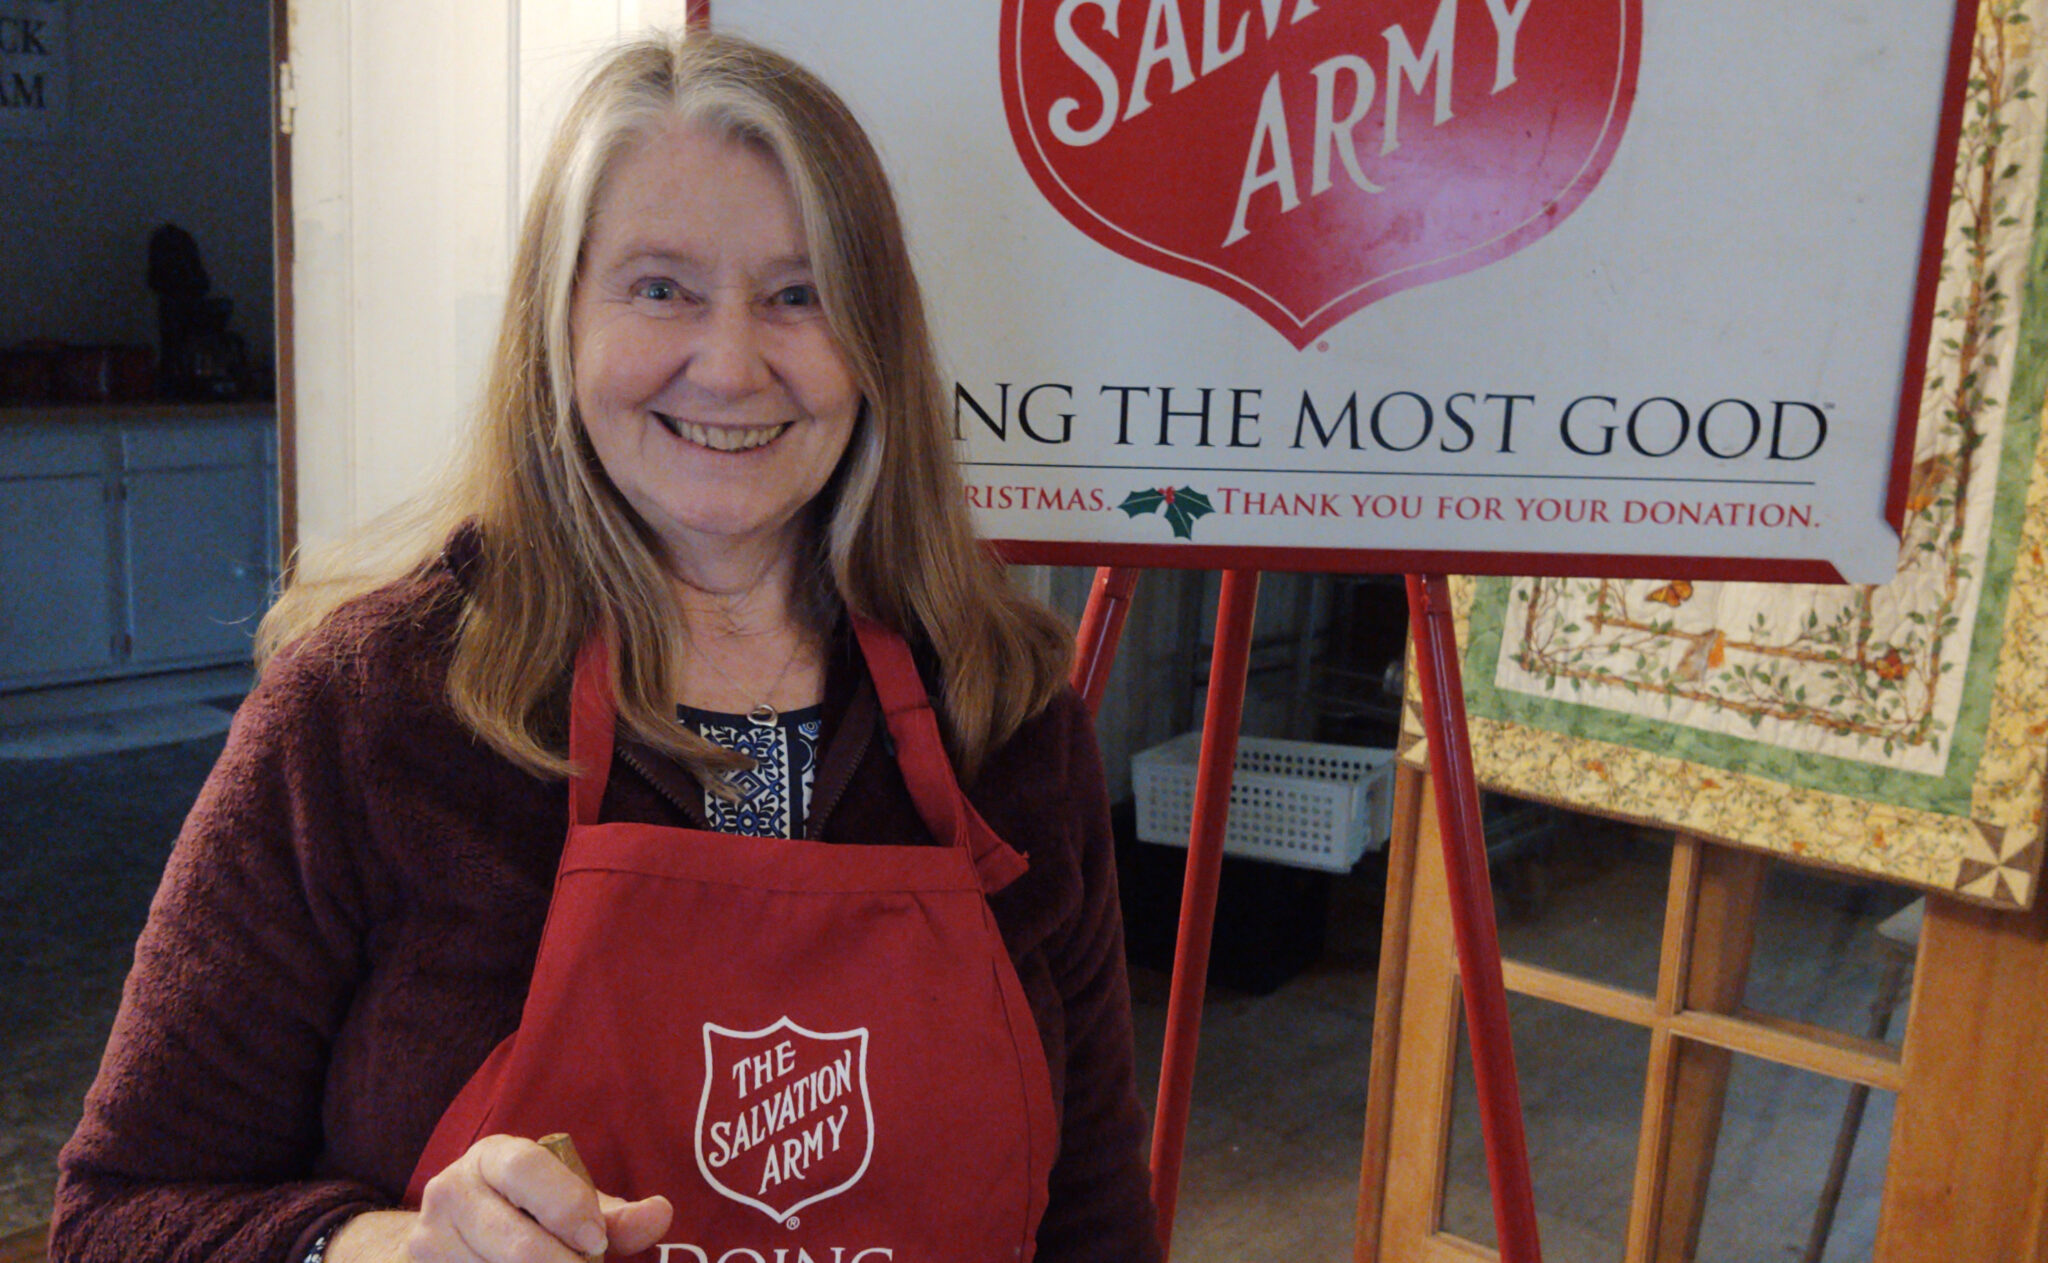 Terry Derleth named Honorary Chairperson of Salvation Army’s Red Kettle Campaign